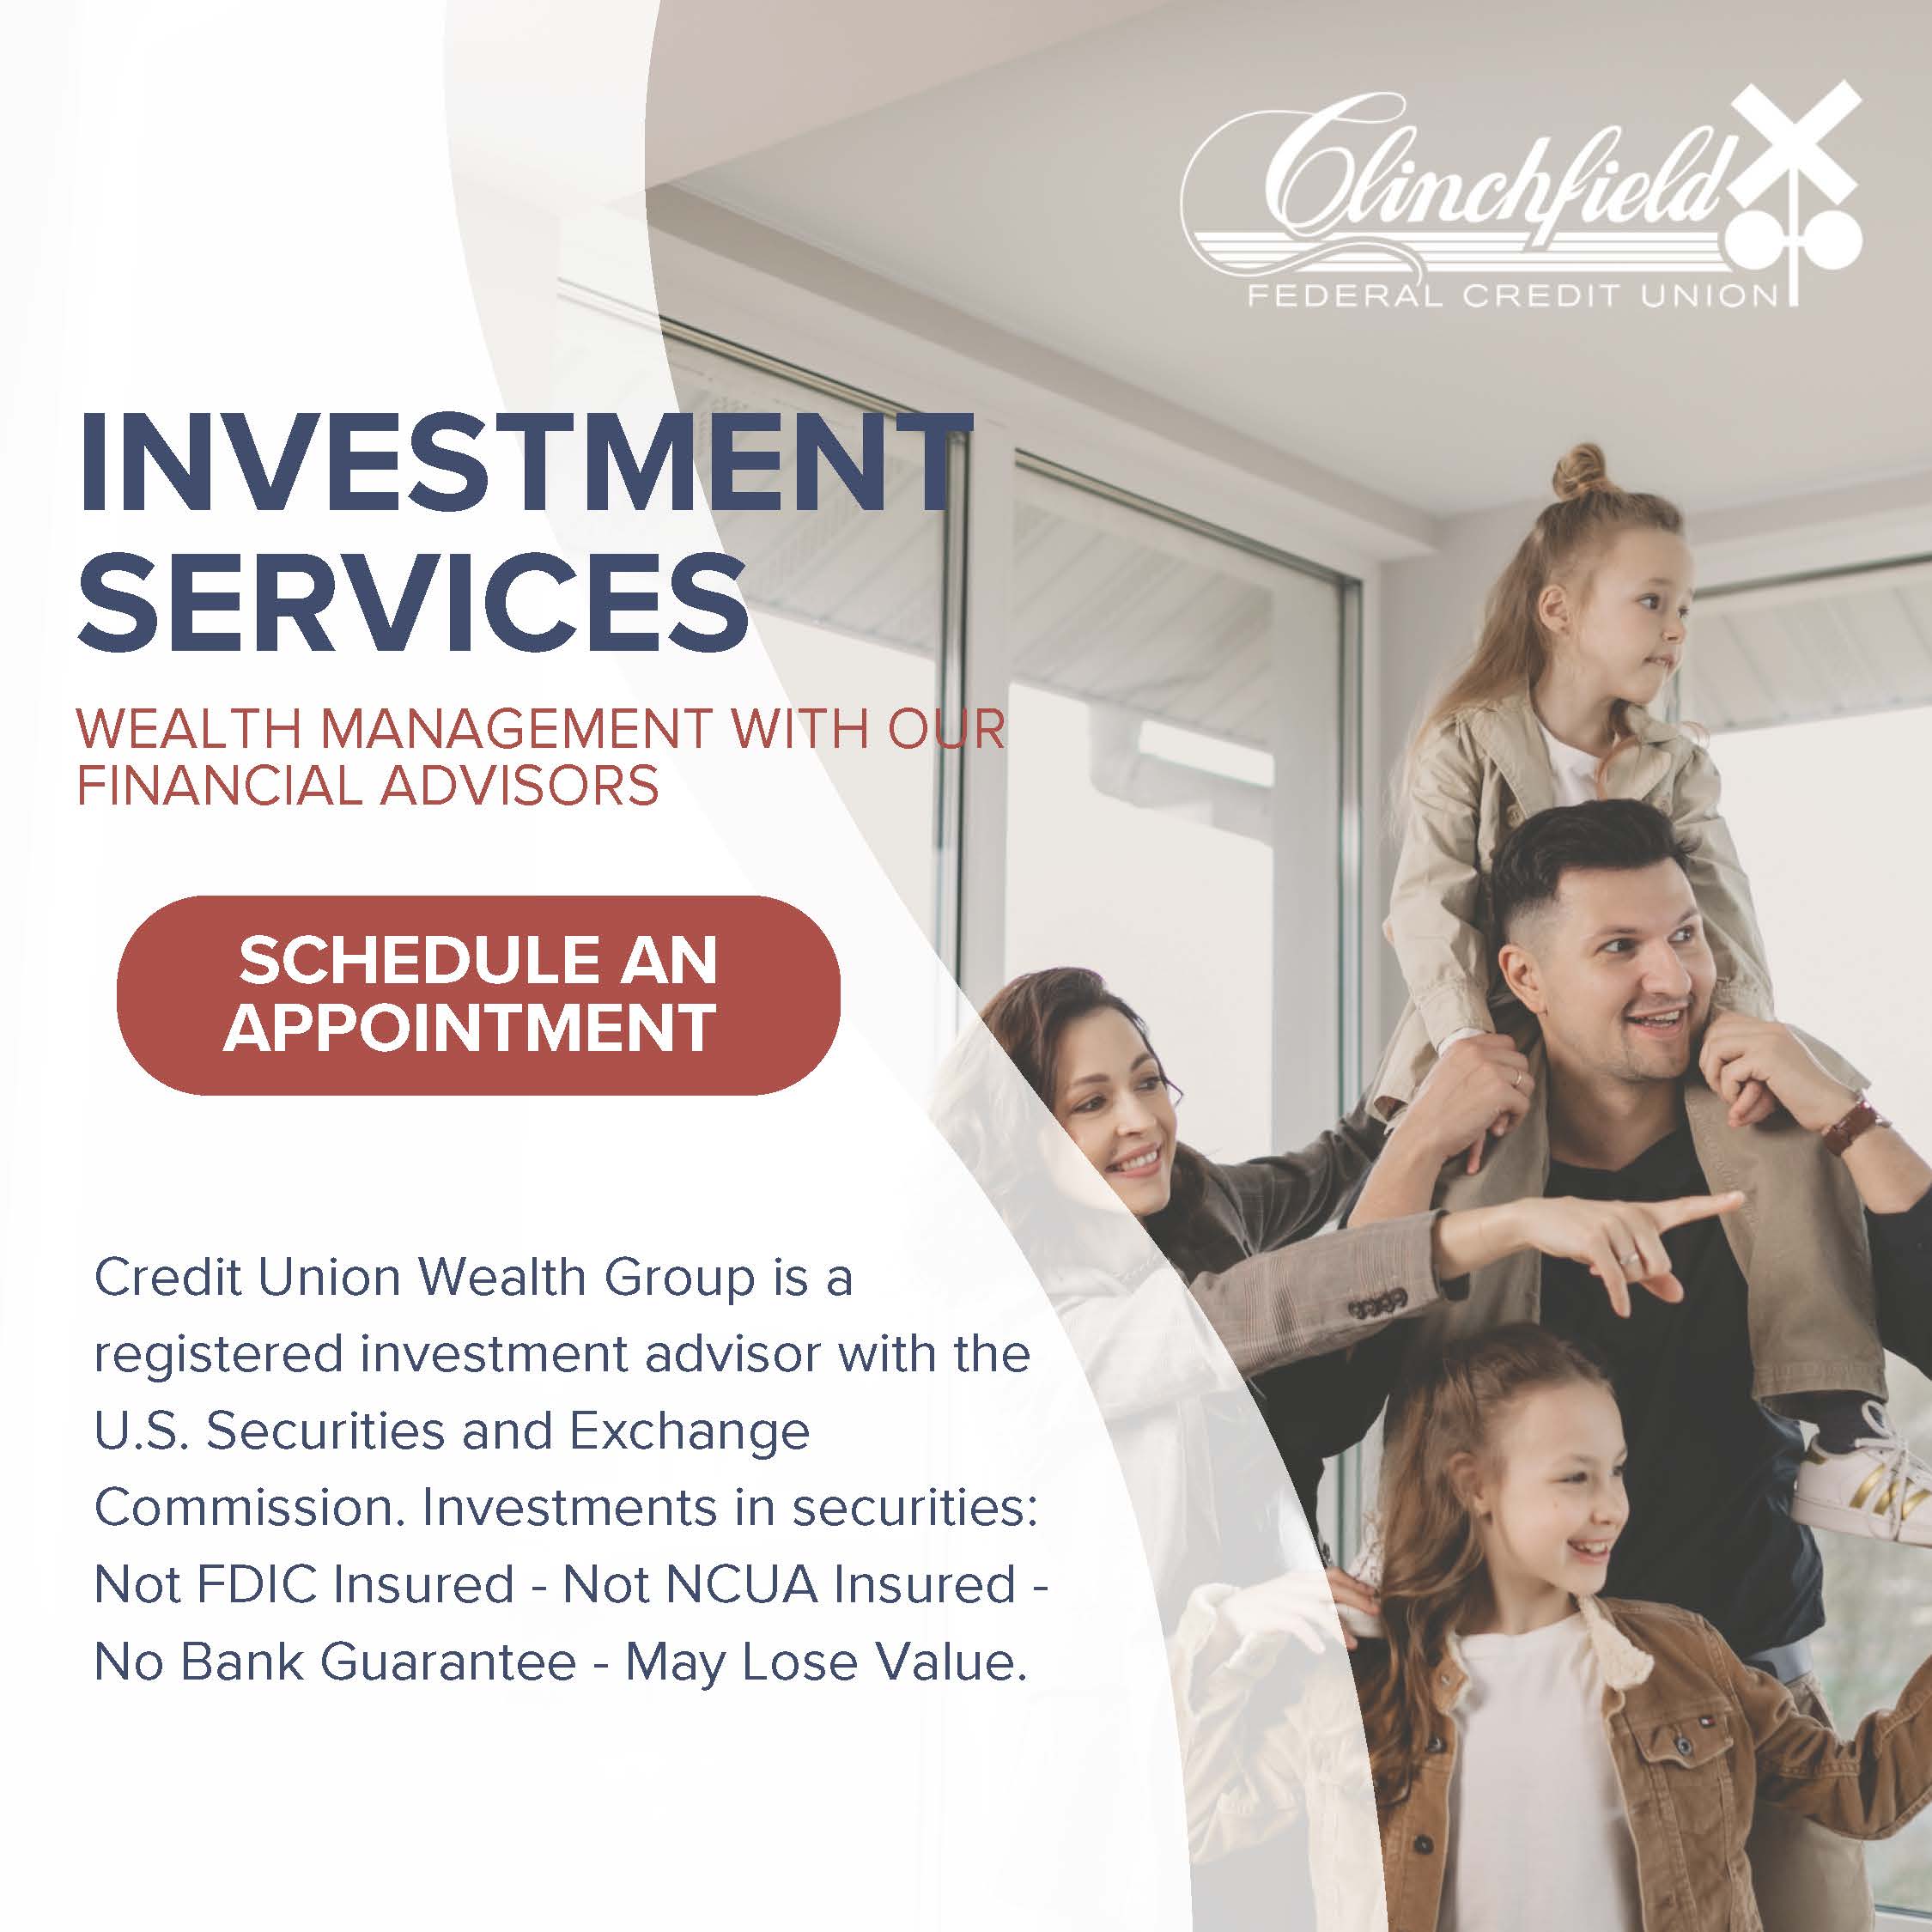 Investment Services. Wealth Management with our Financial Advisors. Image of a Mom, Dad caring a young girl on his shoulders, and another girl smiling.  Click for details